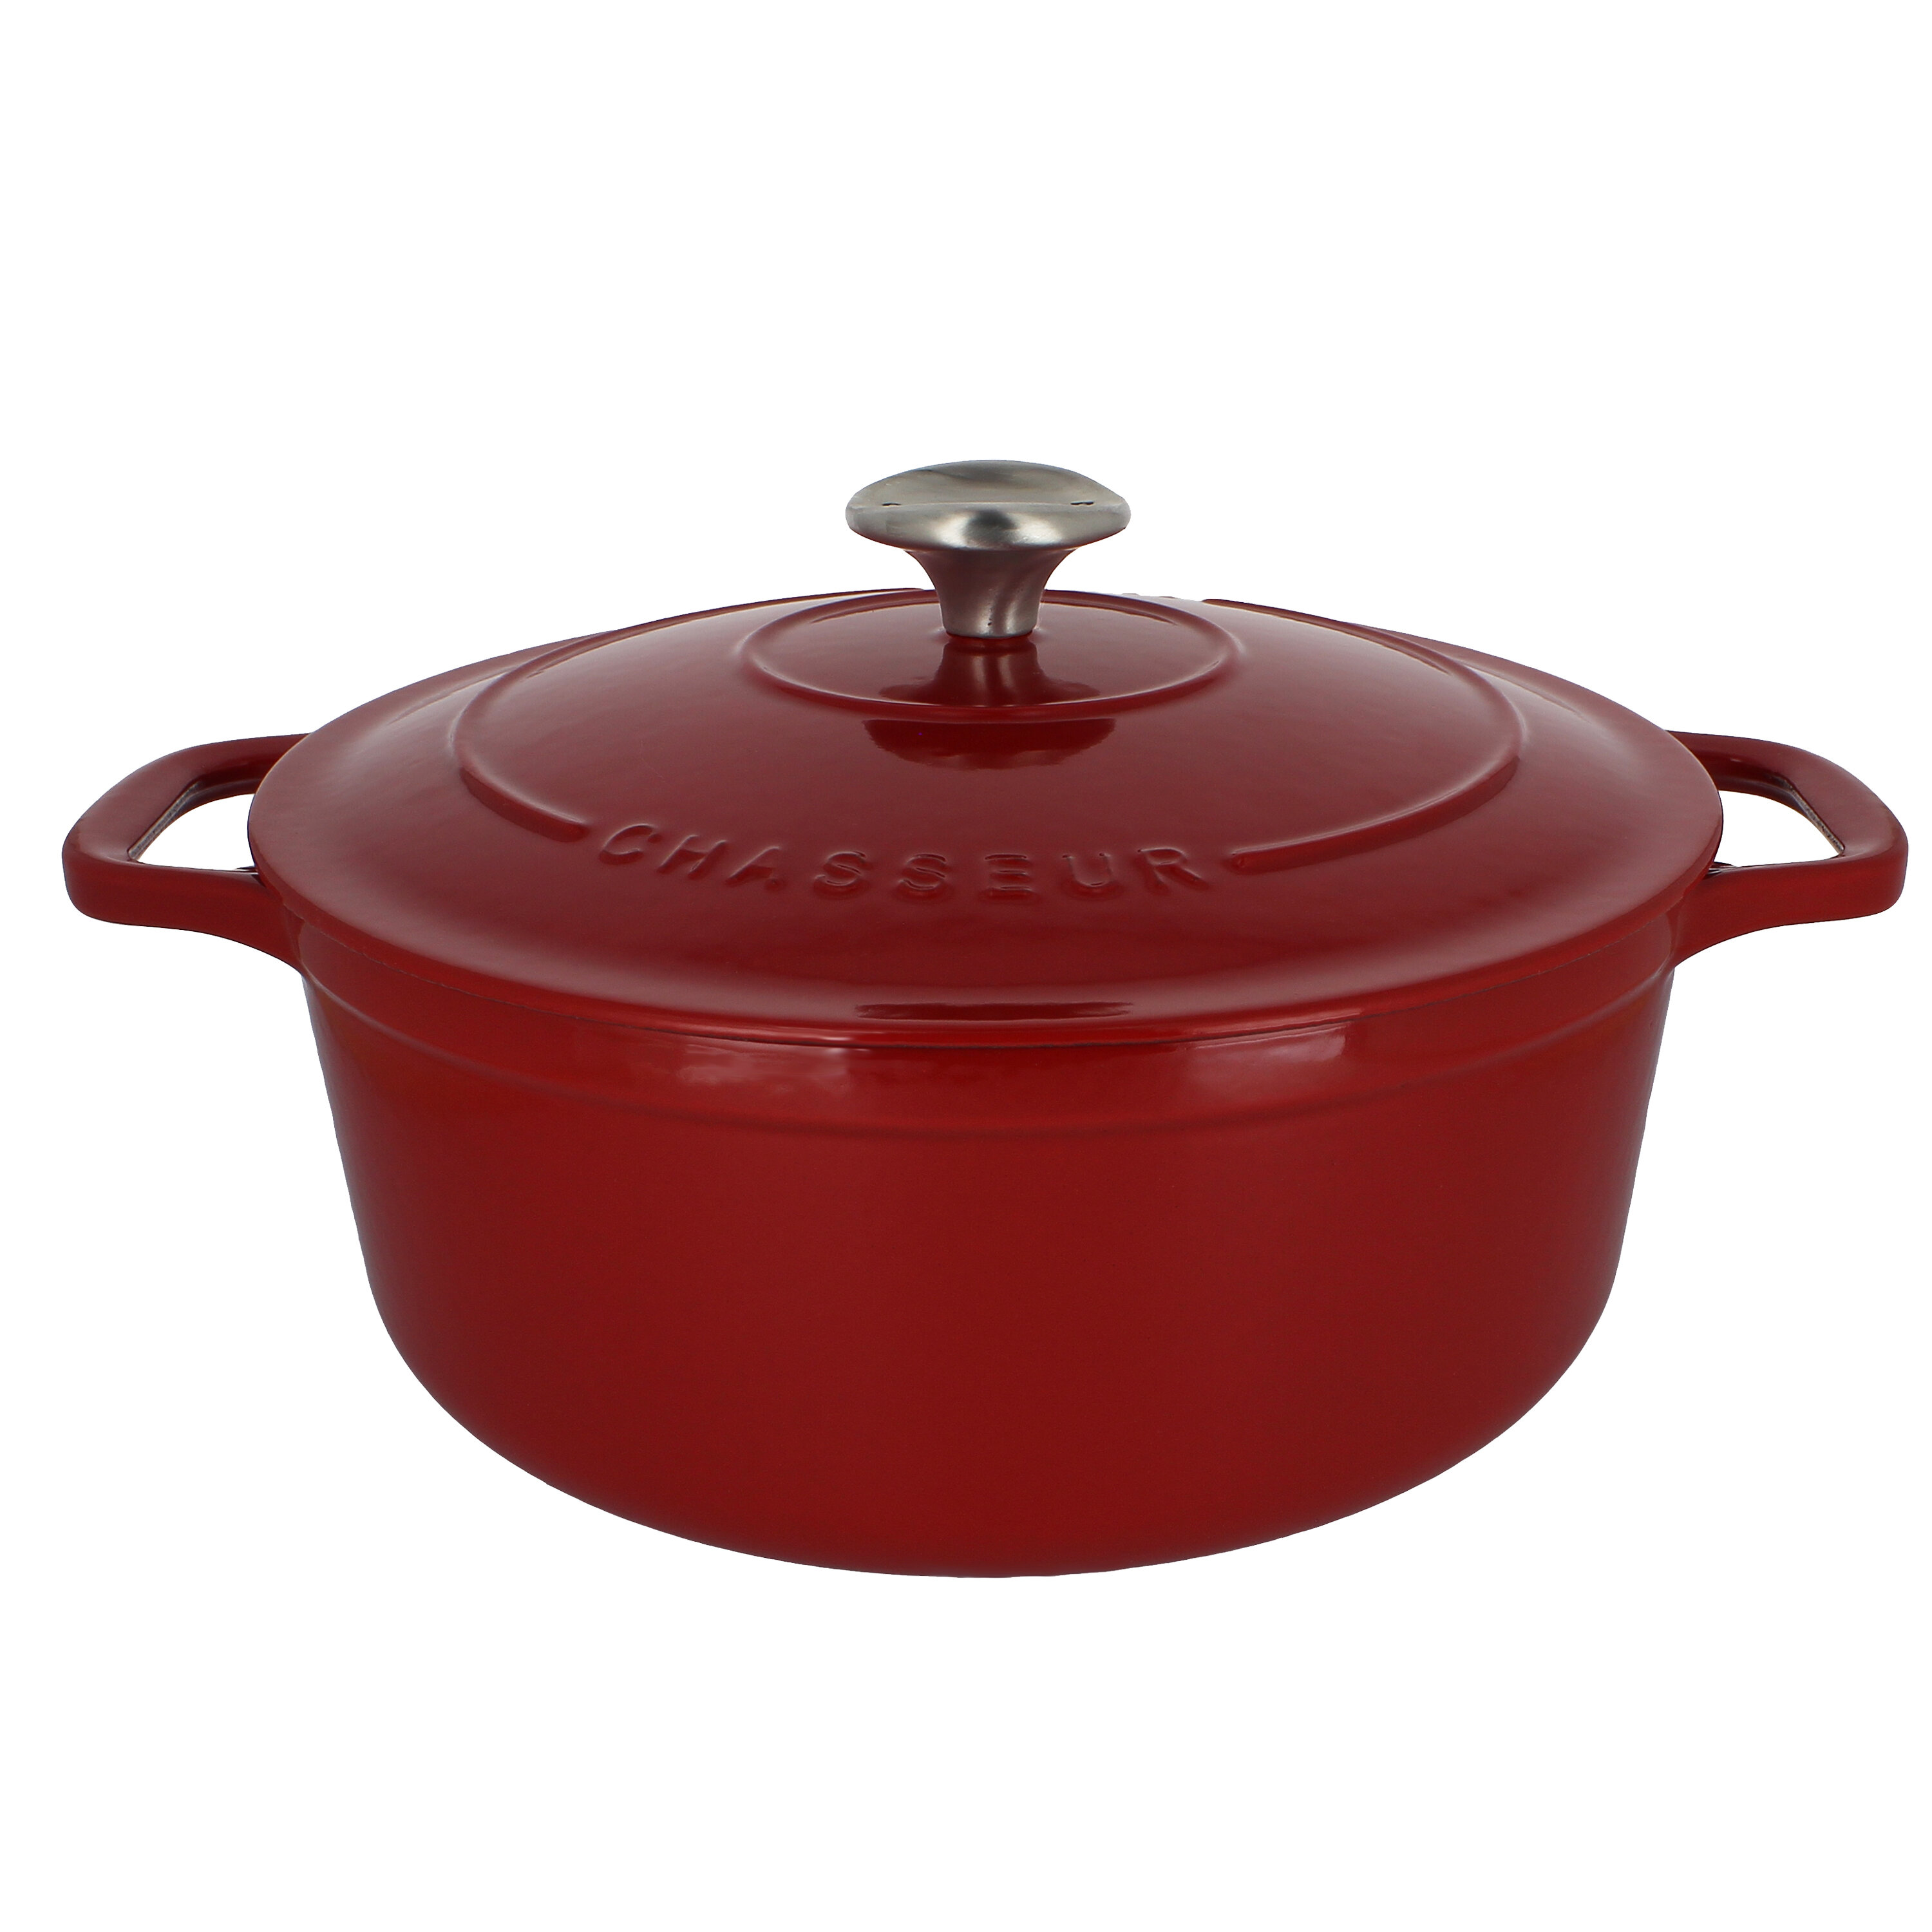 Chasseur French Enameled Cast Iron Braiser with Lid, 2.6-Quart